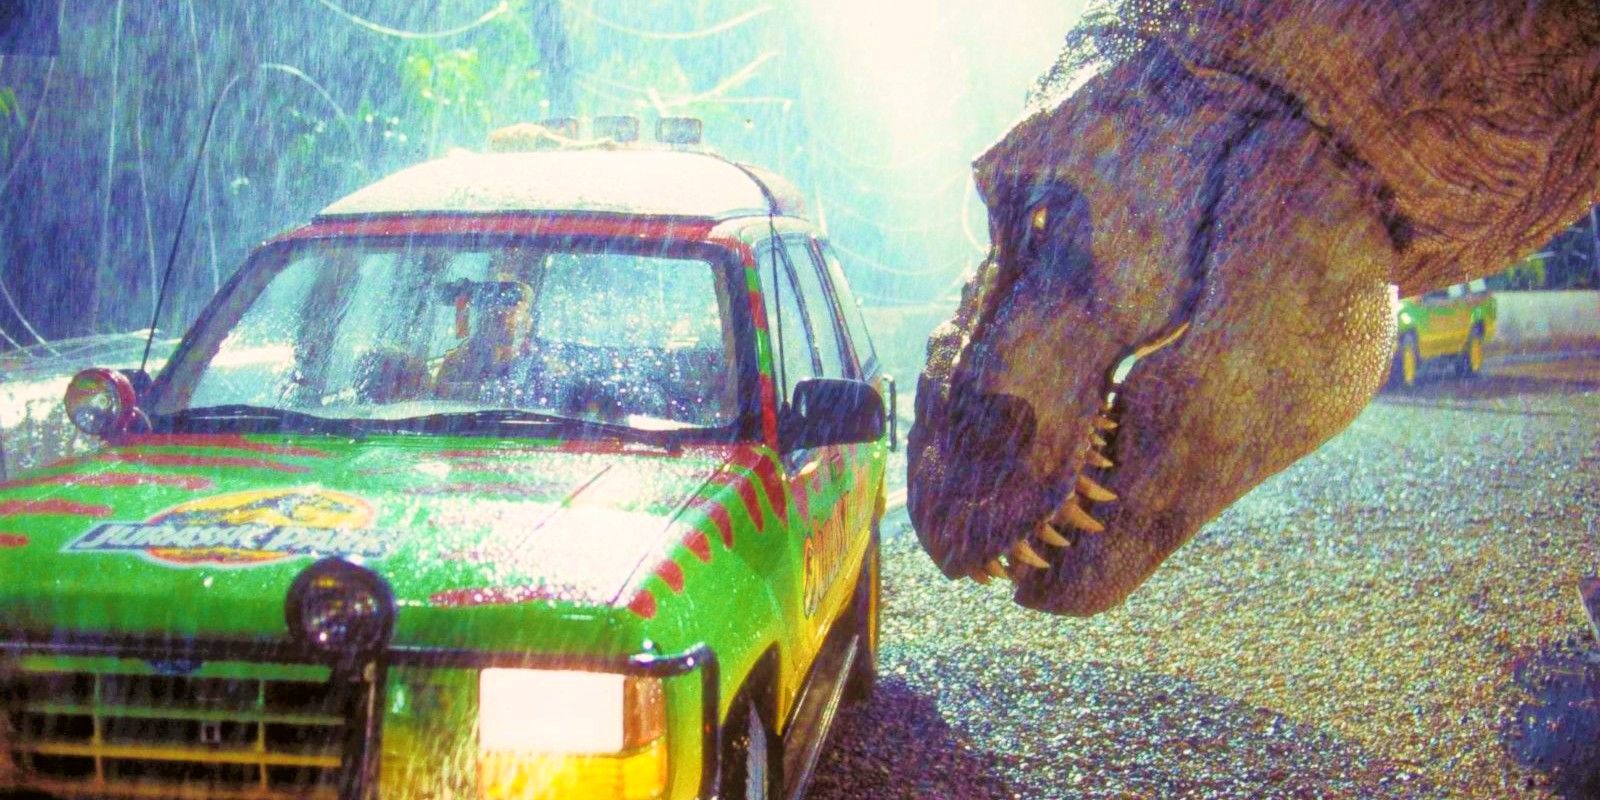 A t-rex attacking a Jeep in Jurassic Park. 